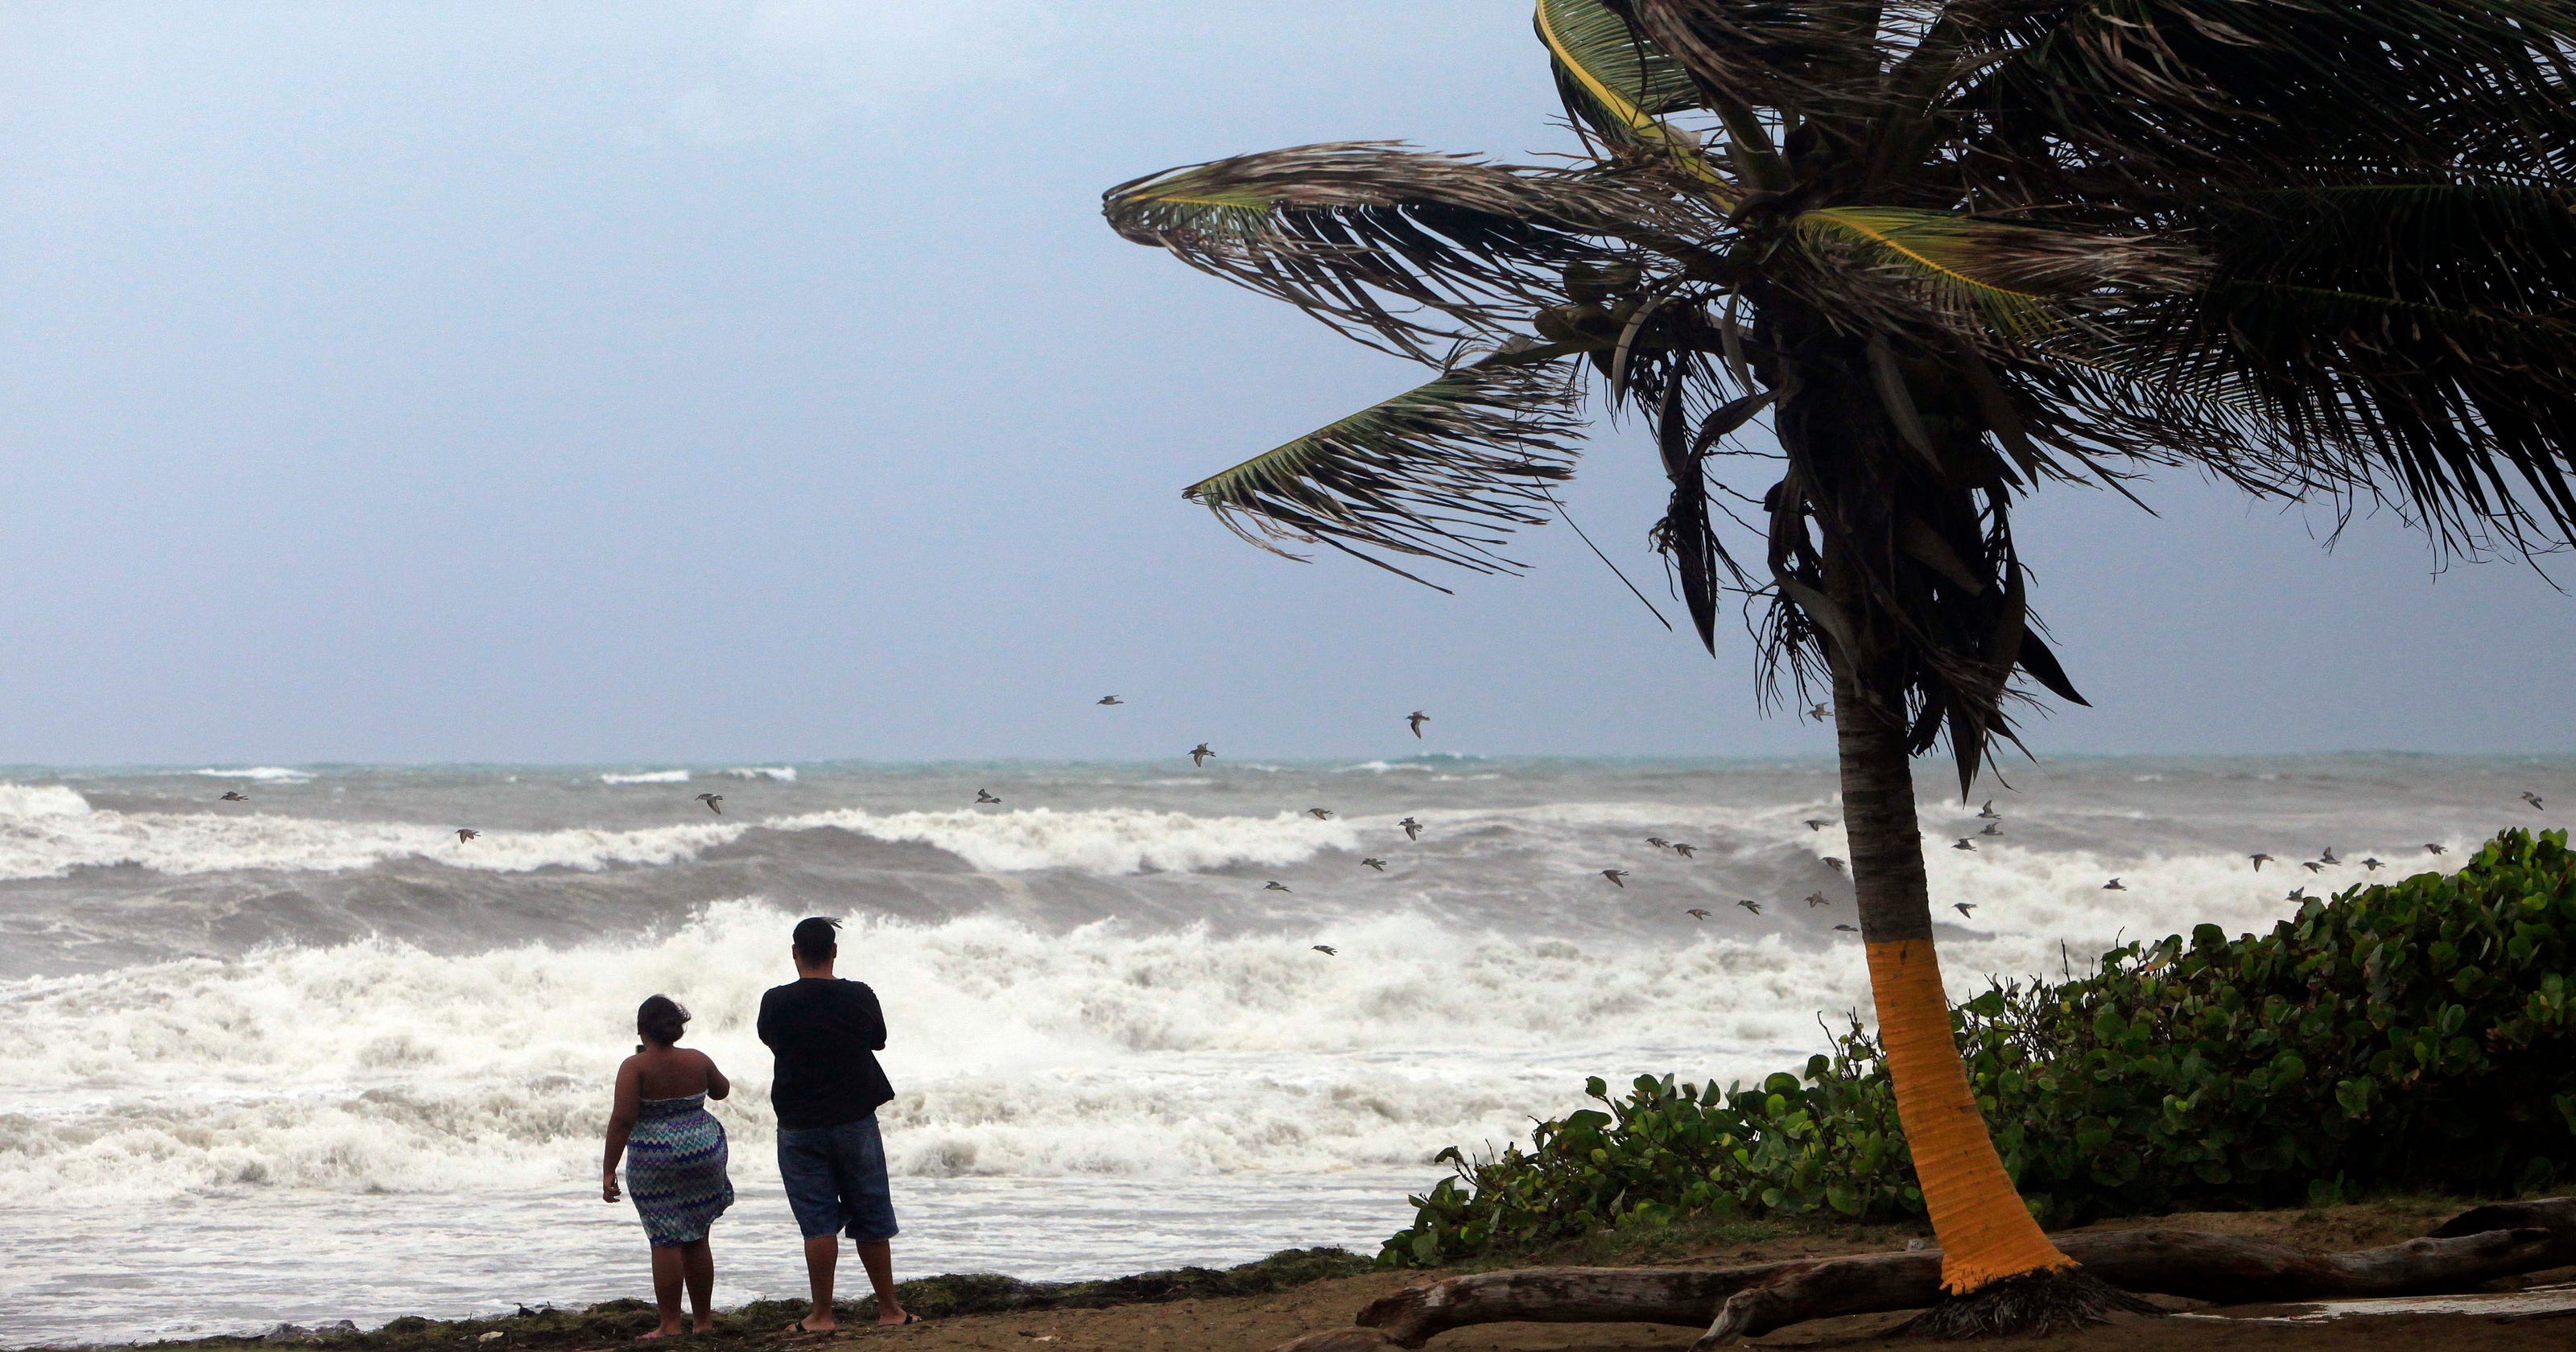 State of emergency in Florida as Tropical Storm Erika nears